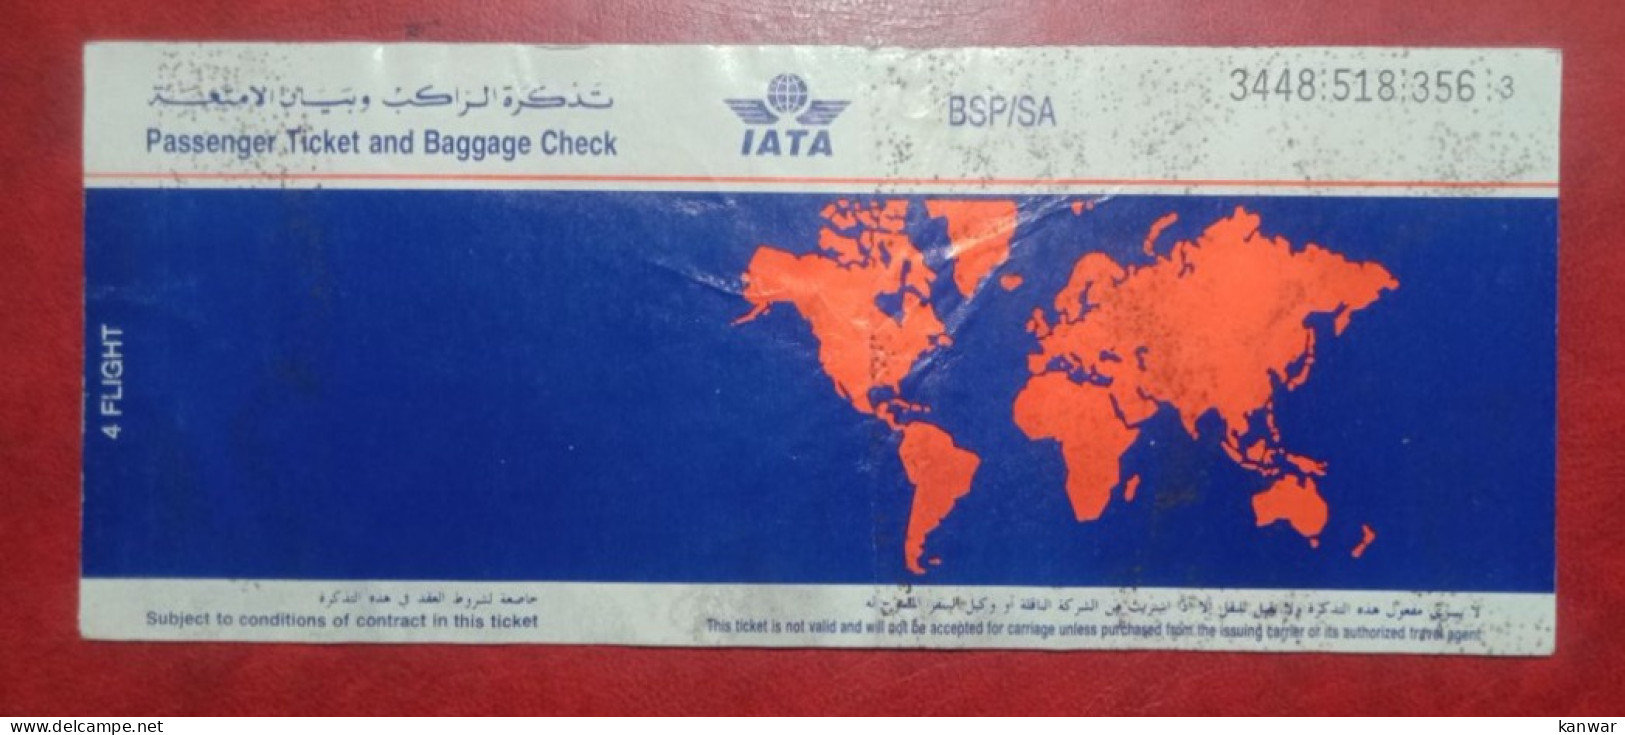 1999 SAUDIA AIRLINES PASSENGER TICKET AND BAGGAGE CHECK - Billetes